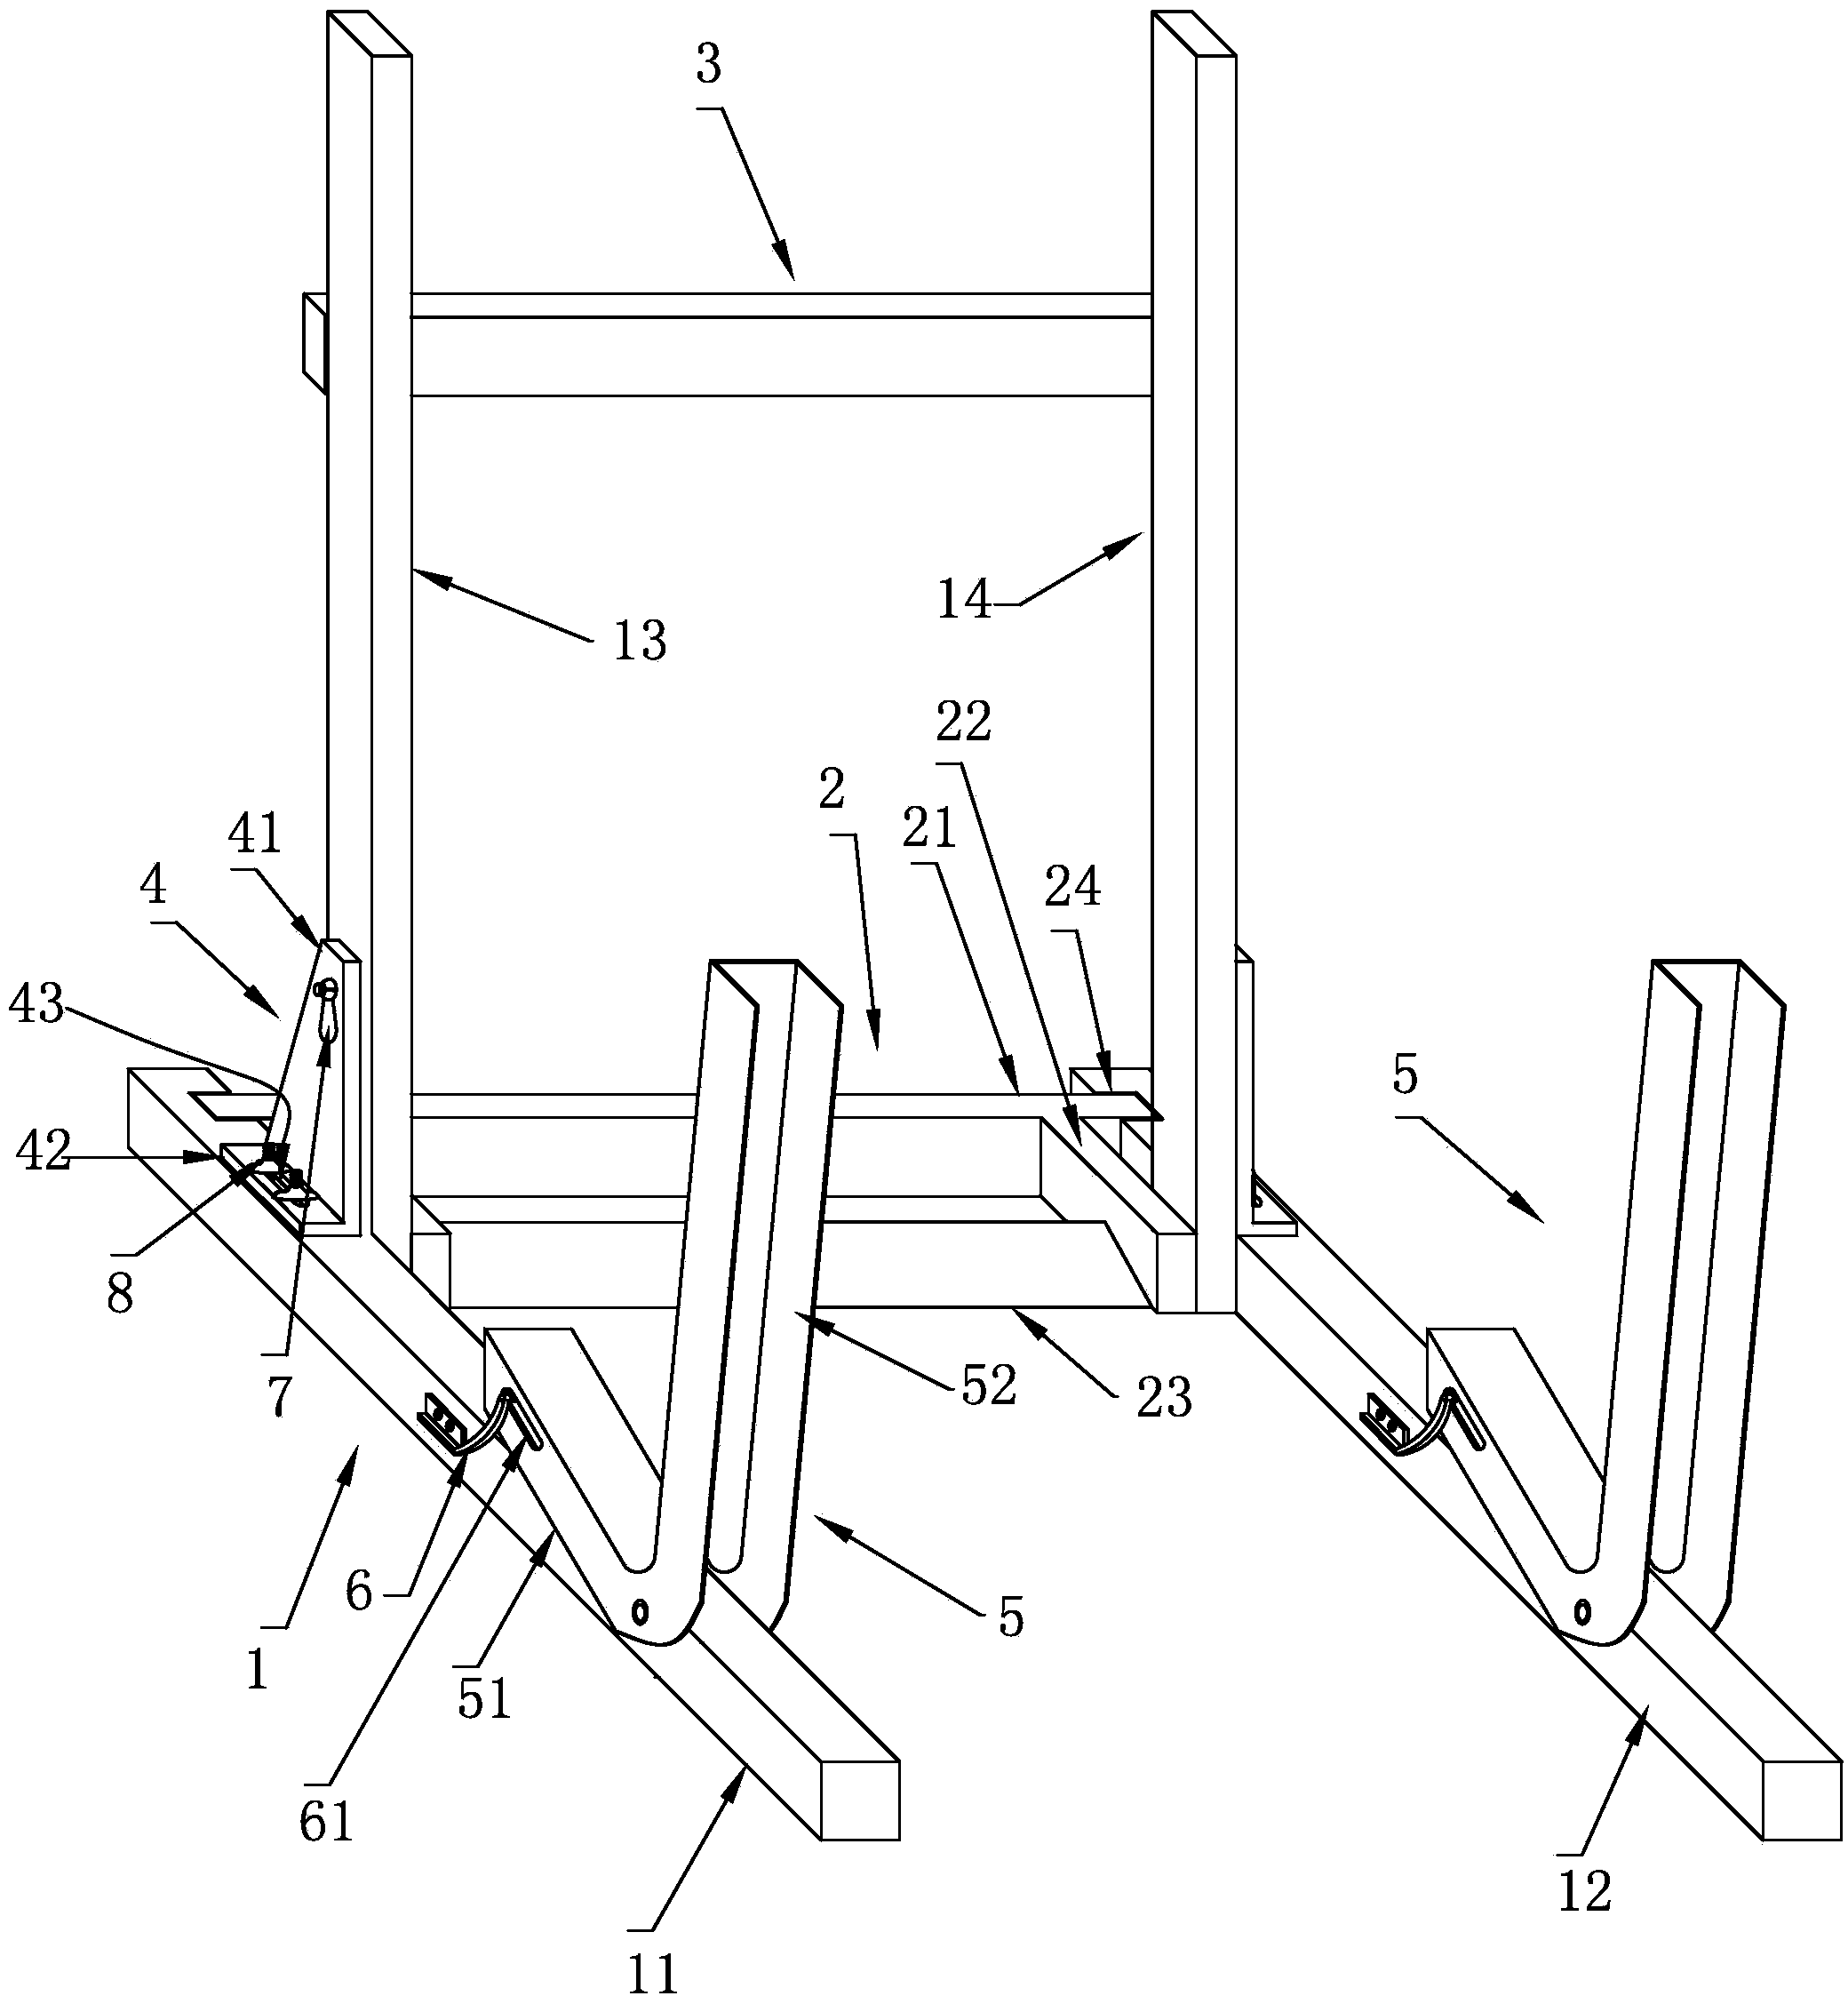 Bracket capable of quickly stacking and ordering construction inventory materials